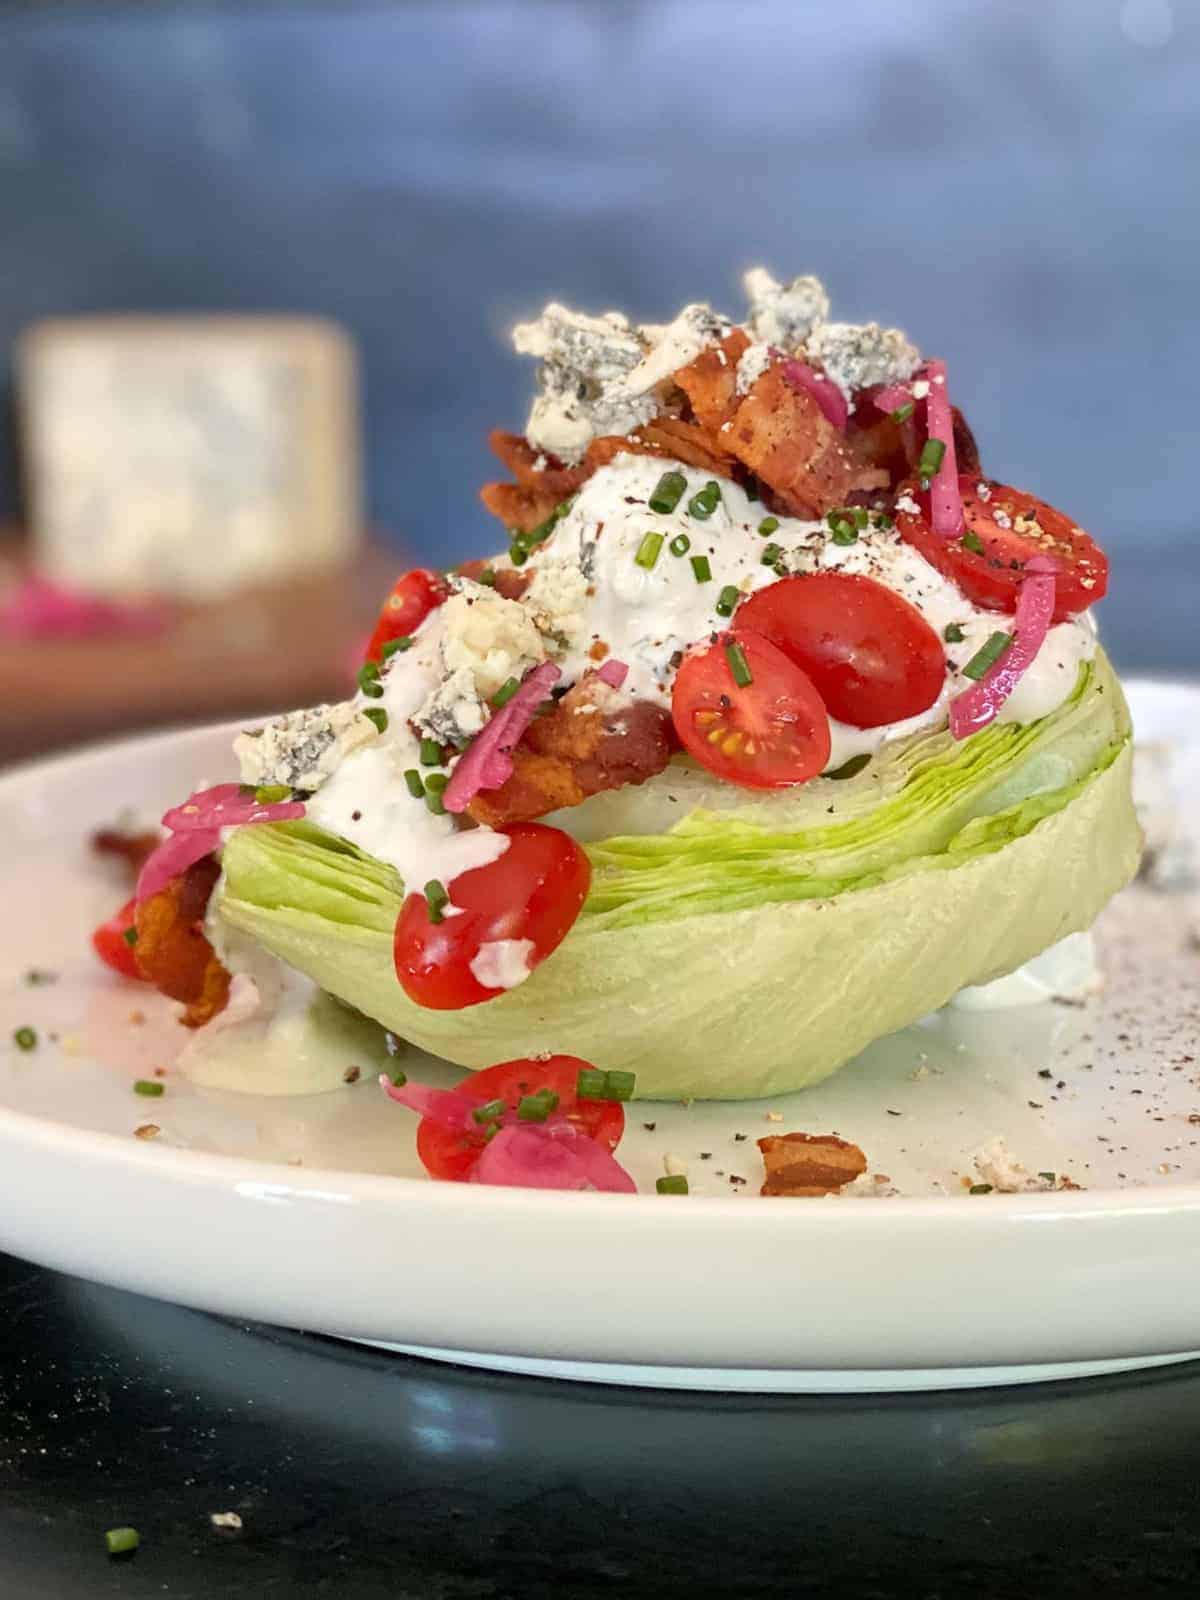 the perfect wedge salad. Cool, crisp iceberg lettuce topped with homemade blue cheese dressing, crispy bacon, fresh tomatoes and chives.